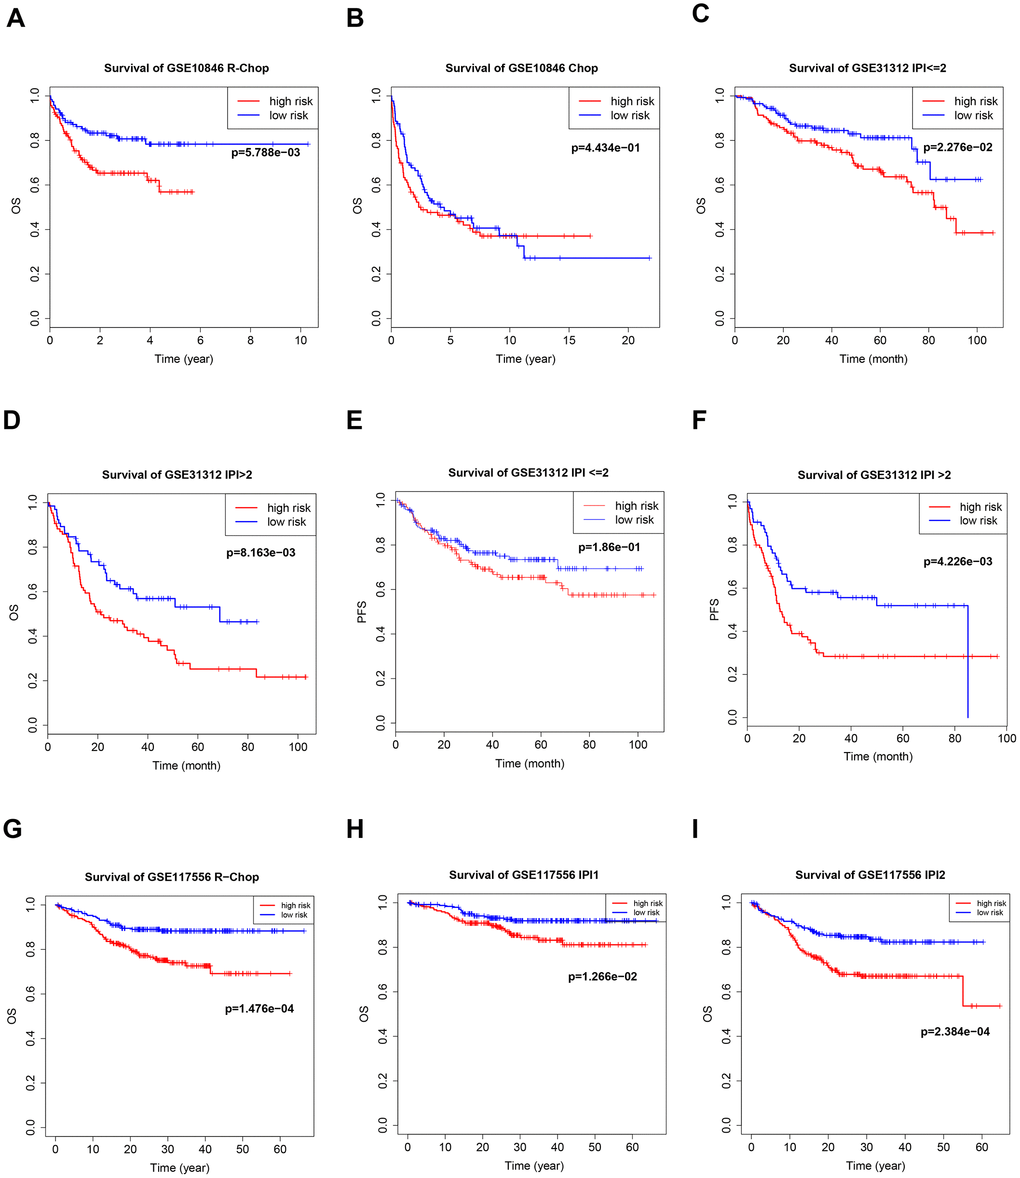 Kaplan–Meier curves of overall survival (OS) in high-risk and low-risk patients treated with cyclophosphamide, doxorubicin, vincristine, and prednisone (CHOP) (B) or CHOP plus rituximab (R-CHOP) (A, G). Kaplan–Meier curves of overall survival (OS) and PFS in high-risk and low-risk patients with different international prognostic index (IPI) values (C–F, H, I).